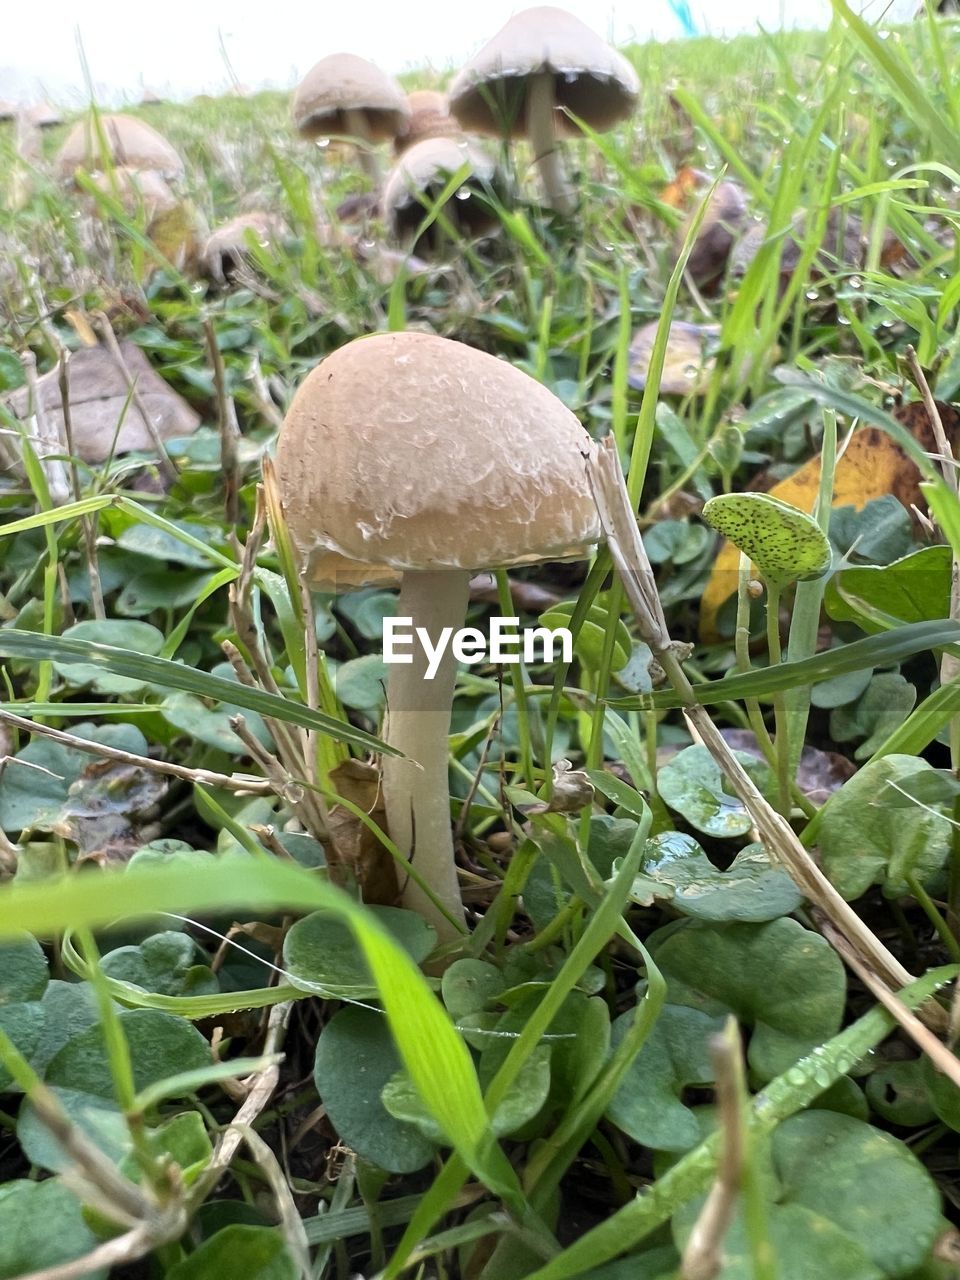 plant, growth, nature, leaf, plant part, food, green, vegetable, land, day, no people, food and drink, close-up, mushroom, tree, outdoors, field, beauty in nature, freshness, high angle view, fungus, grass, penny bun, flower, healthy eating